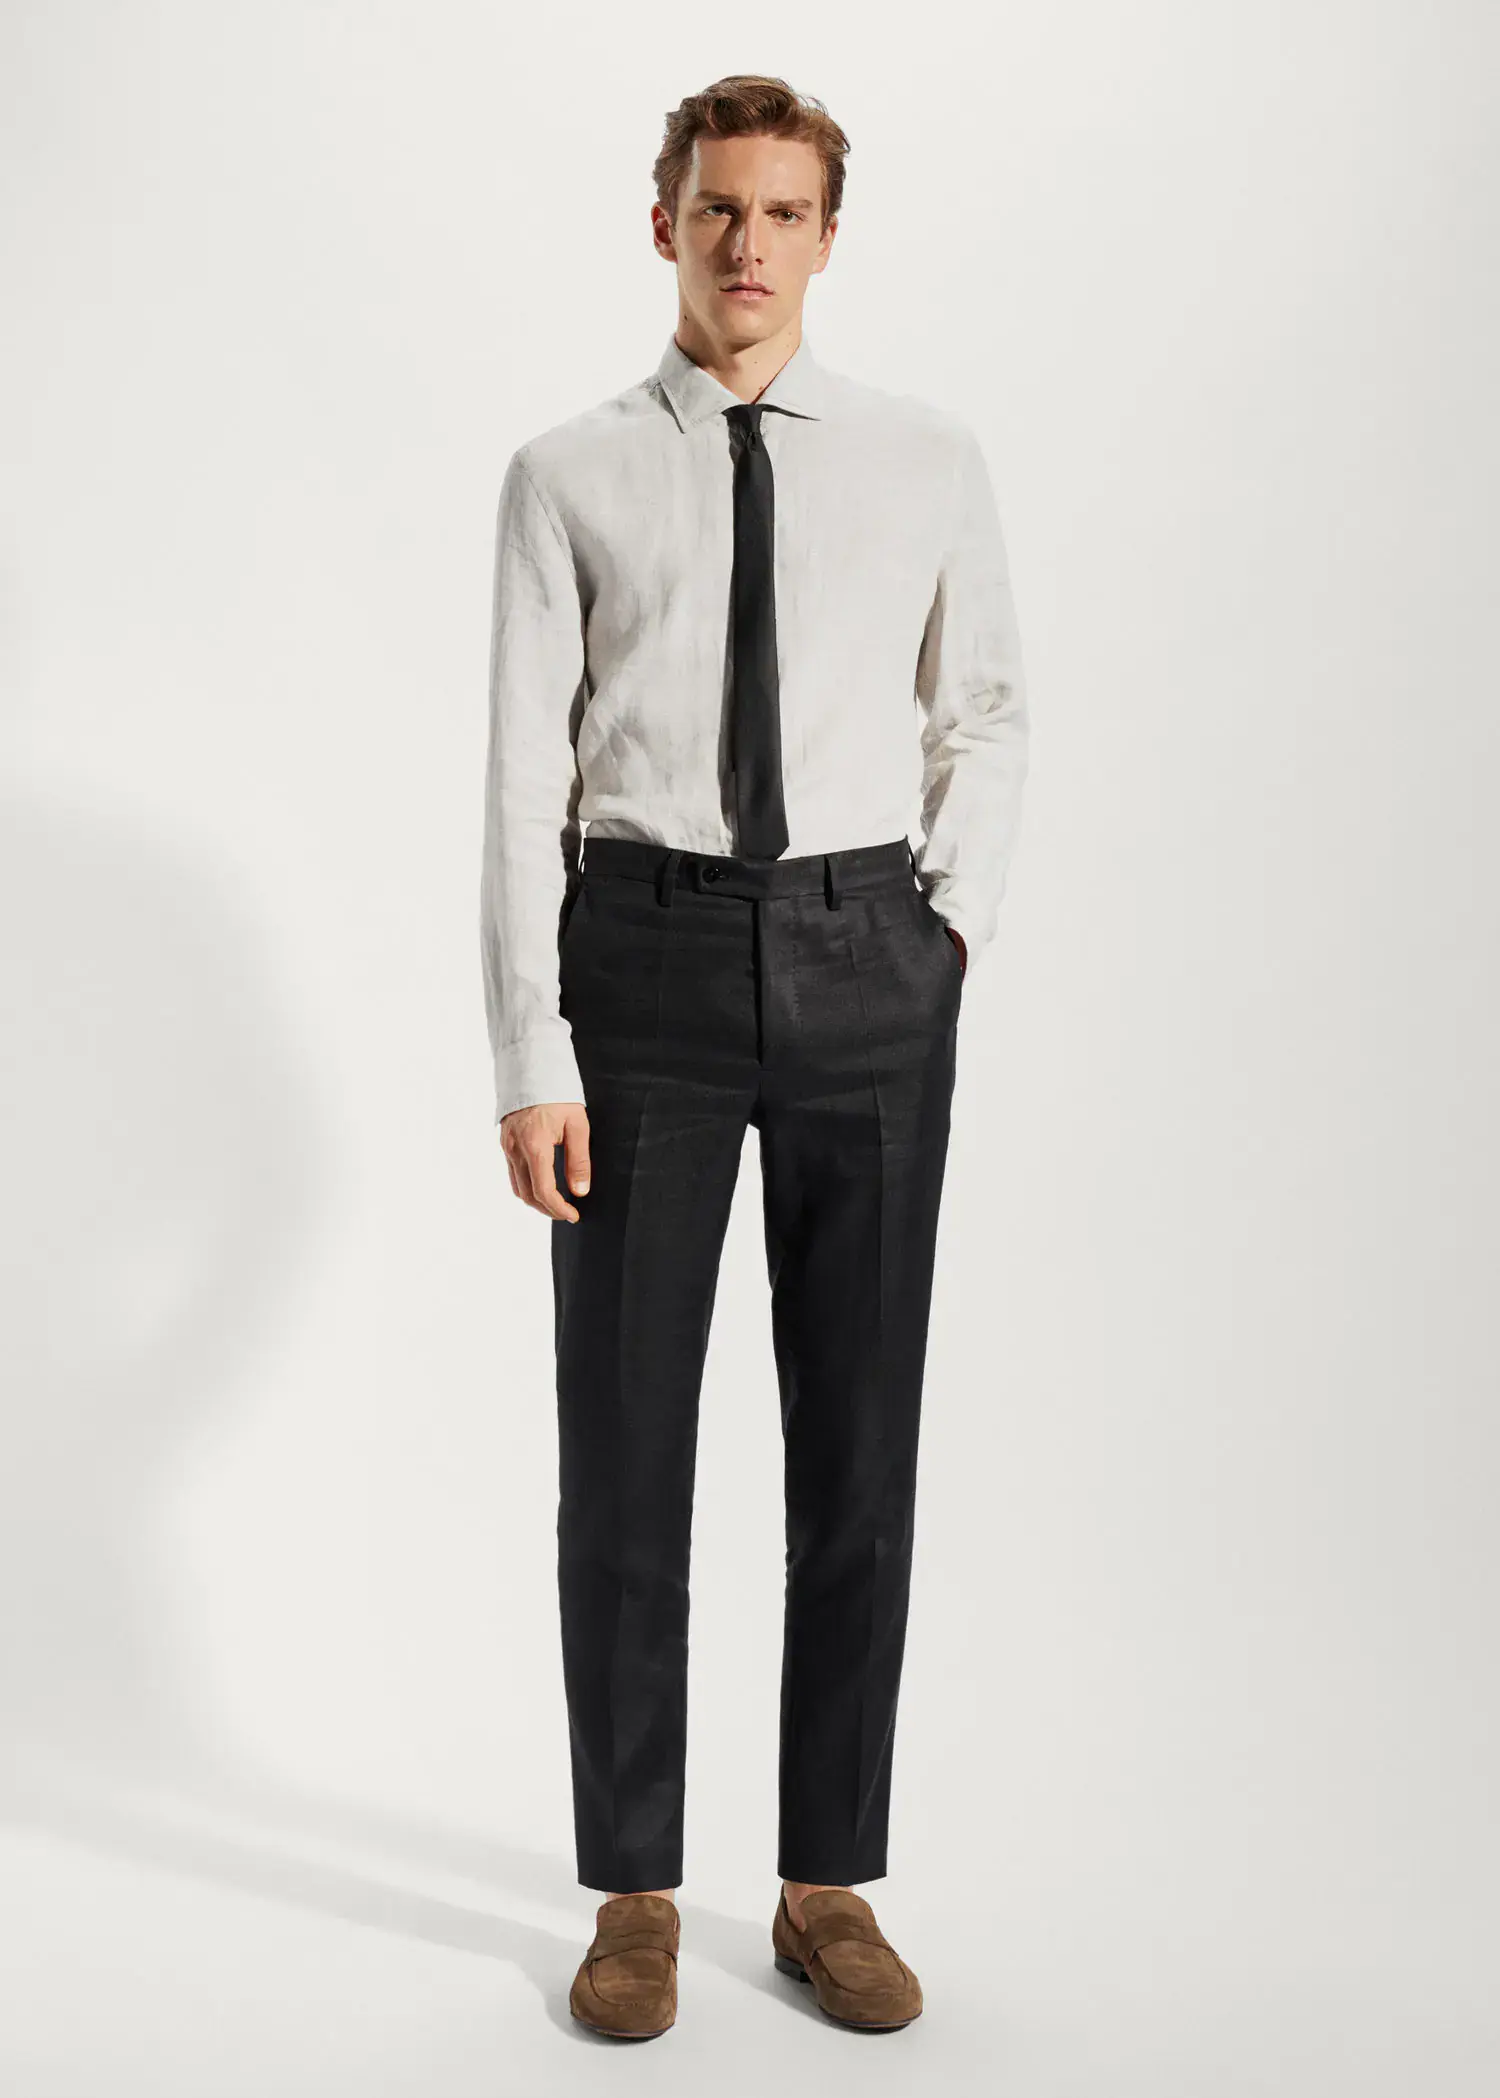 Mango 100% linen suit trousers. a man in a white shirt and black tie. 